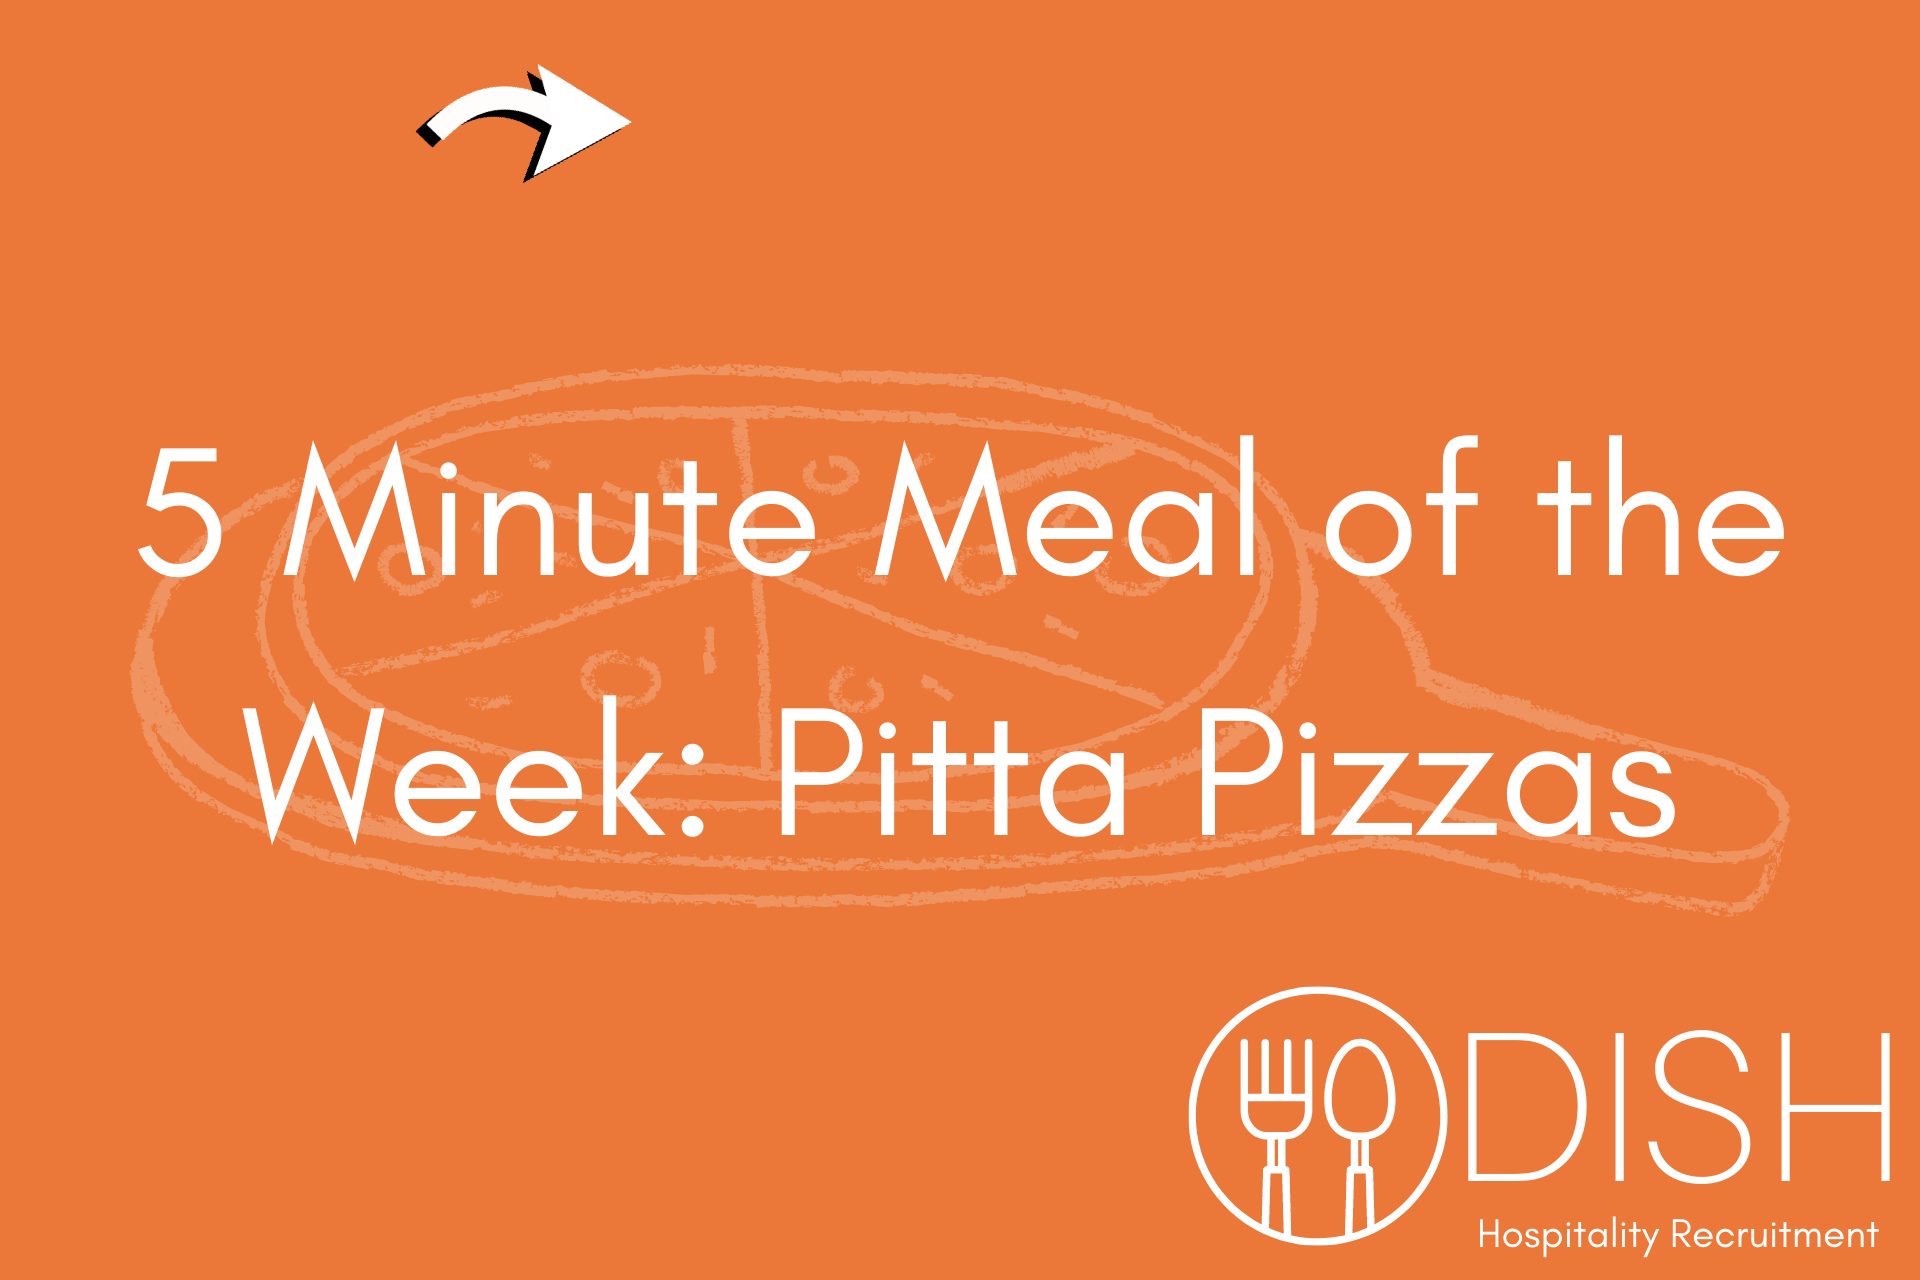 5 Minute Meal of the Week: Pitta Pizzas